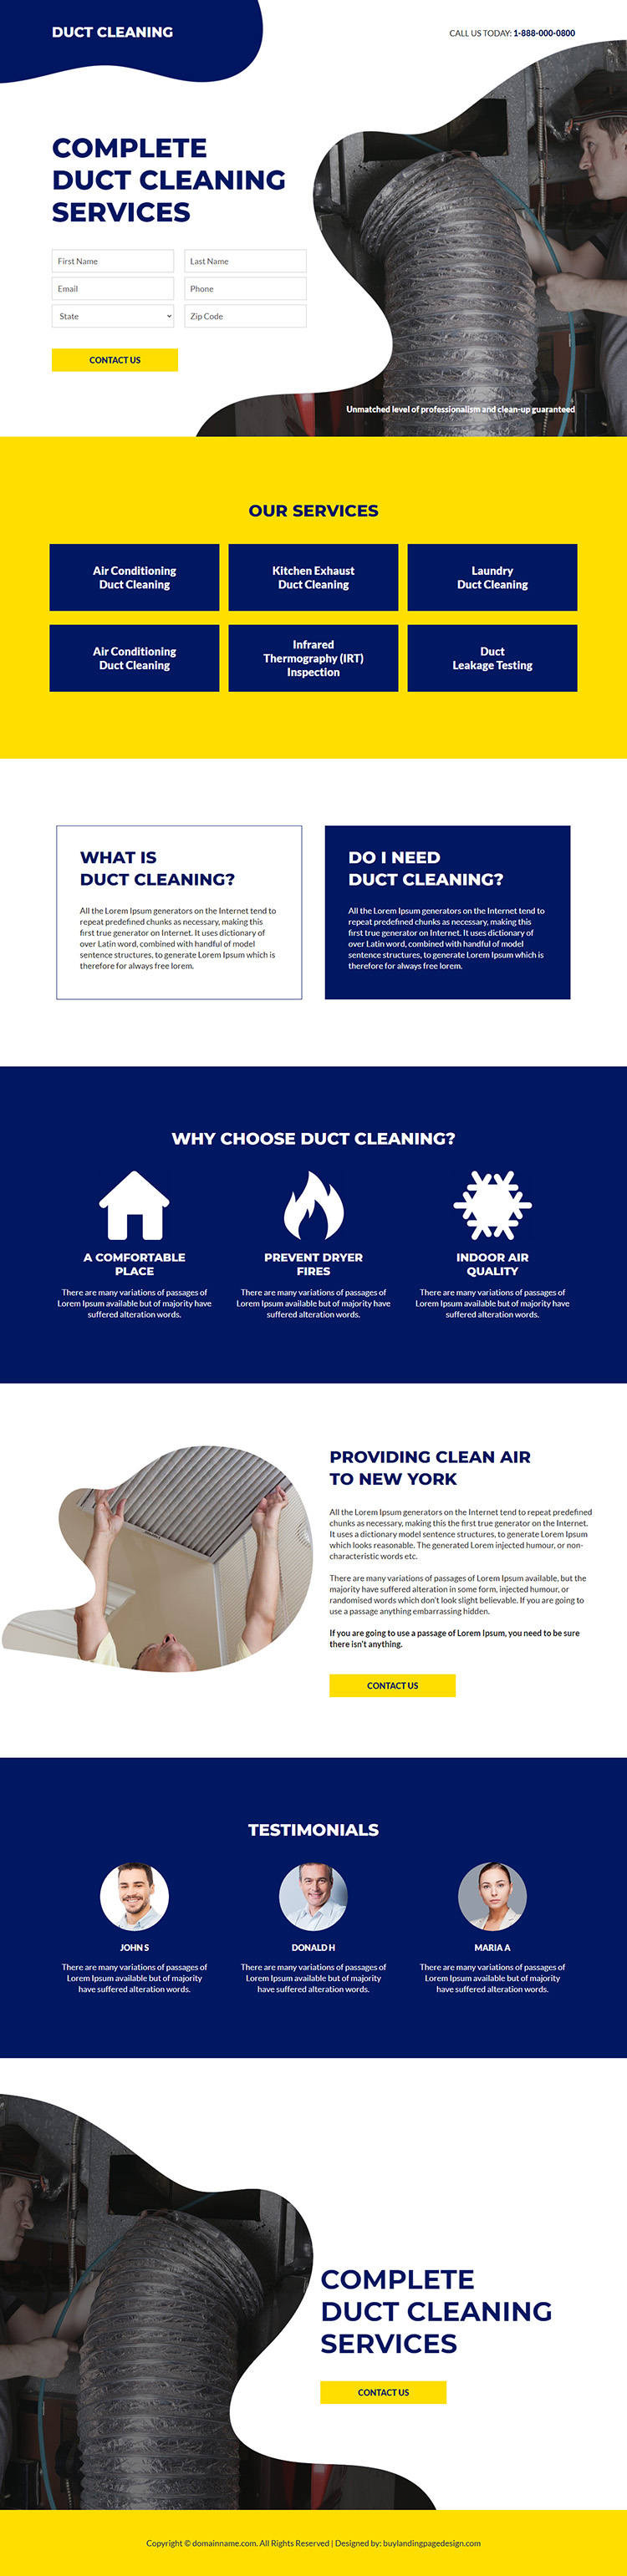 duct cleaning services responsive landing page design